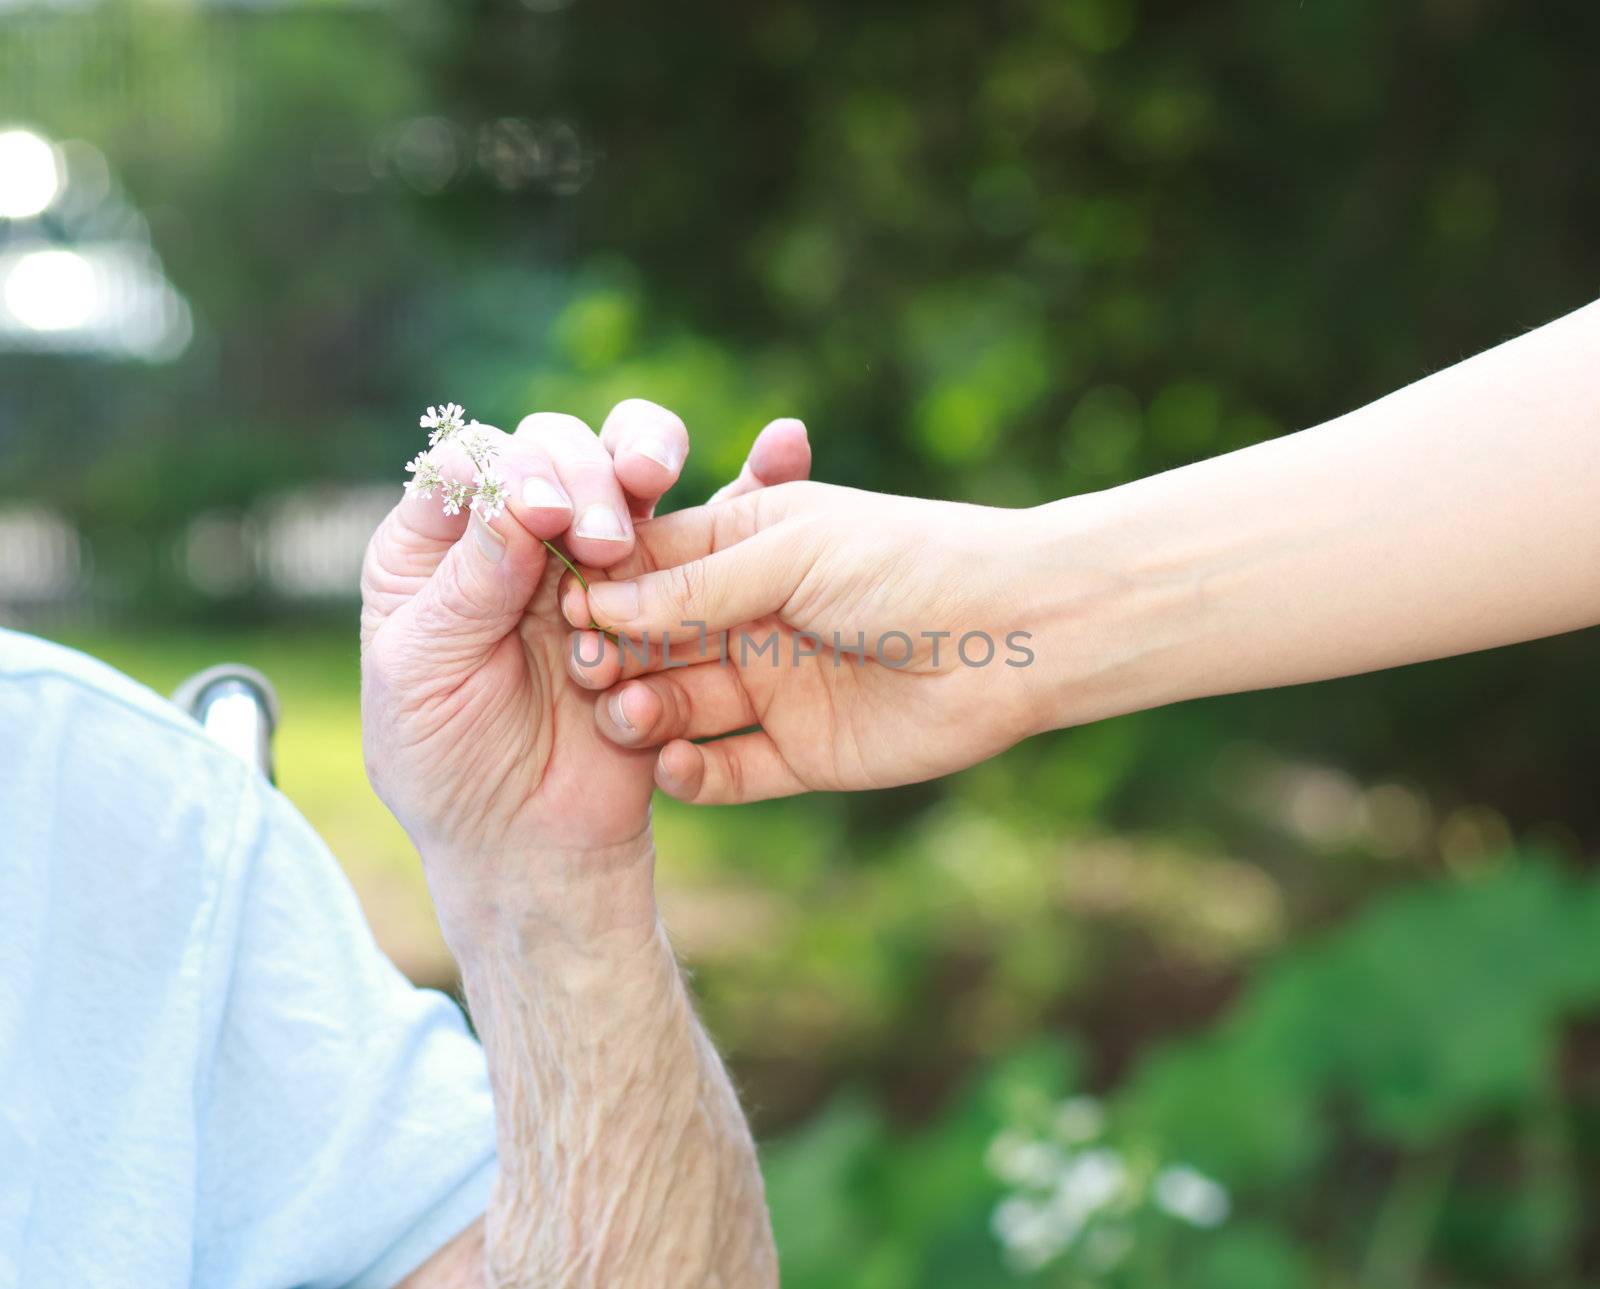 Giving a white flower to senior lady outside